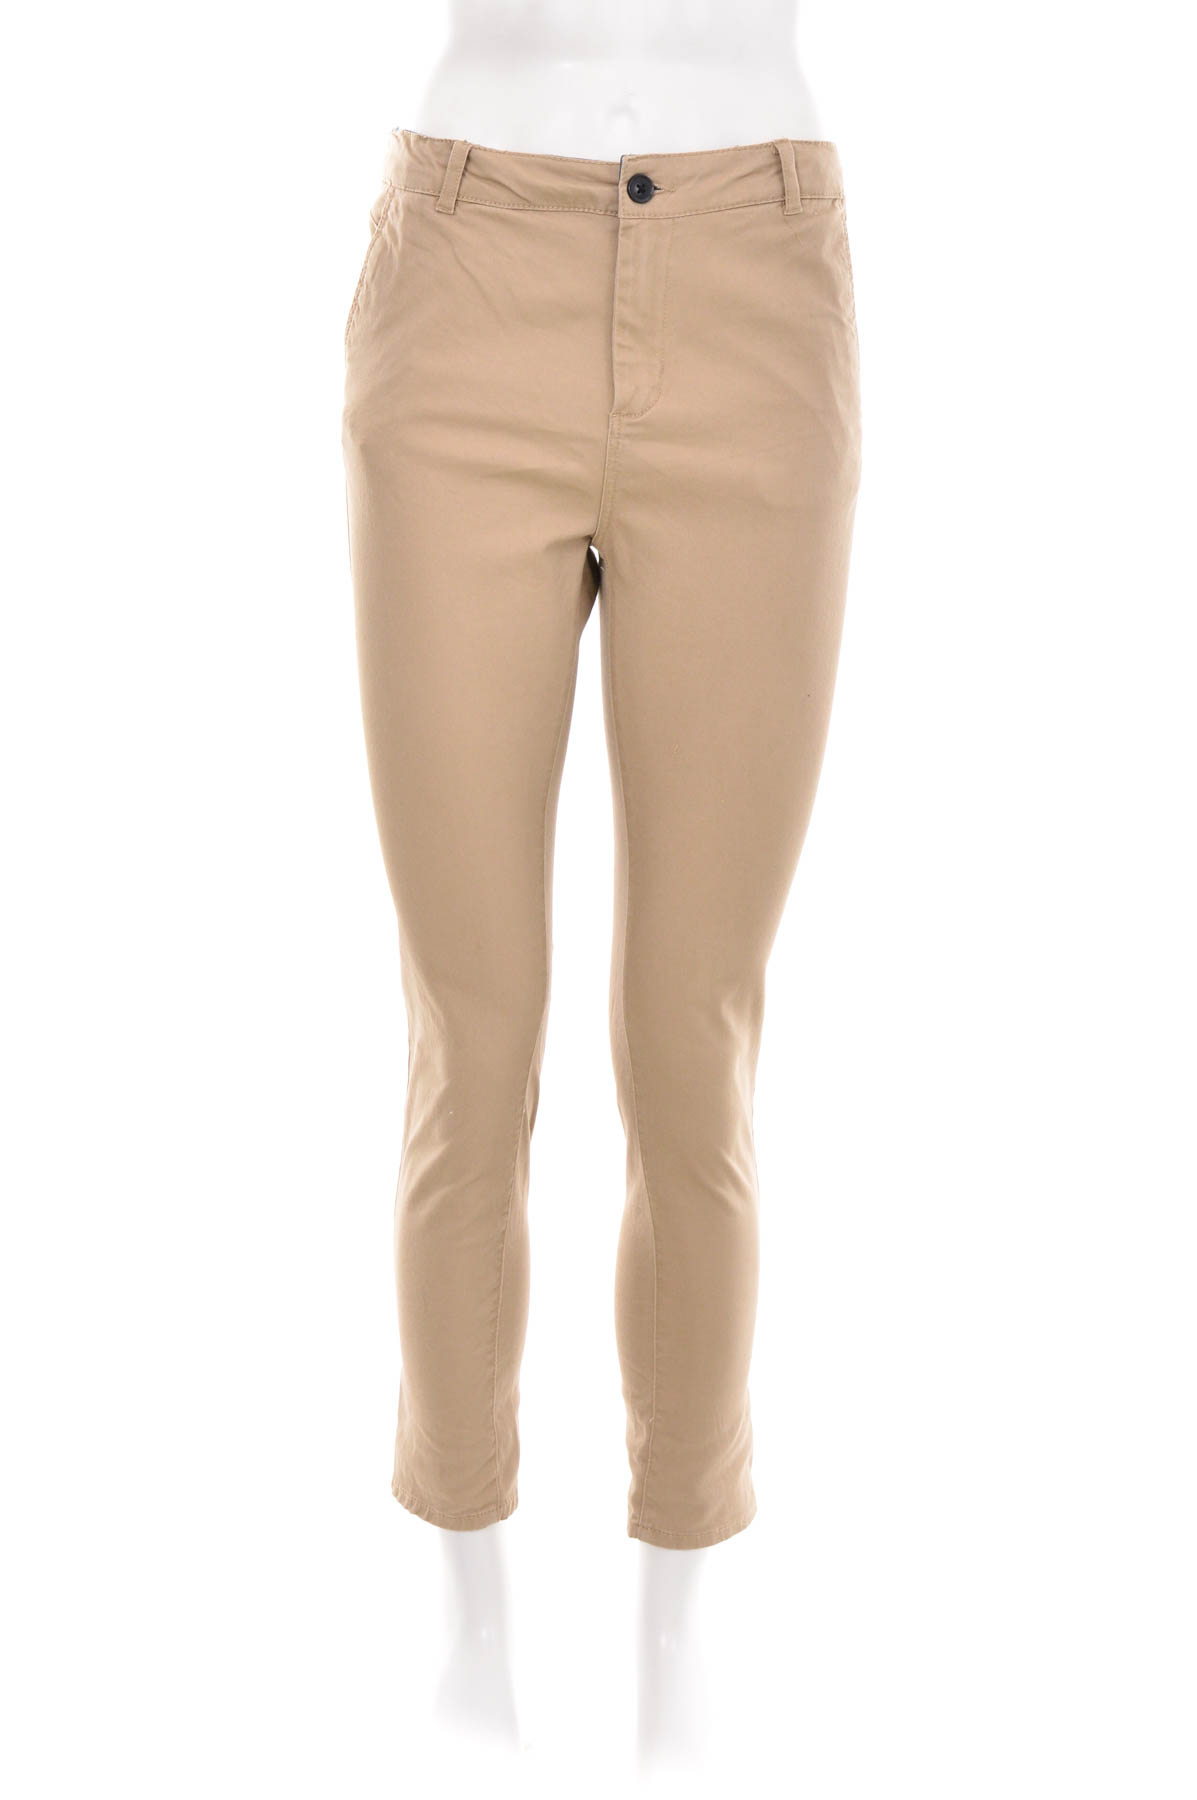 Trousers for boy - H&M - 0